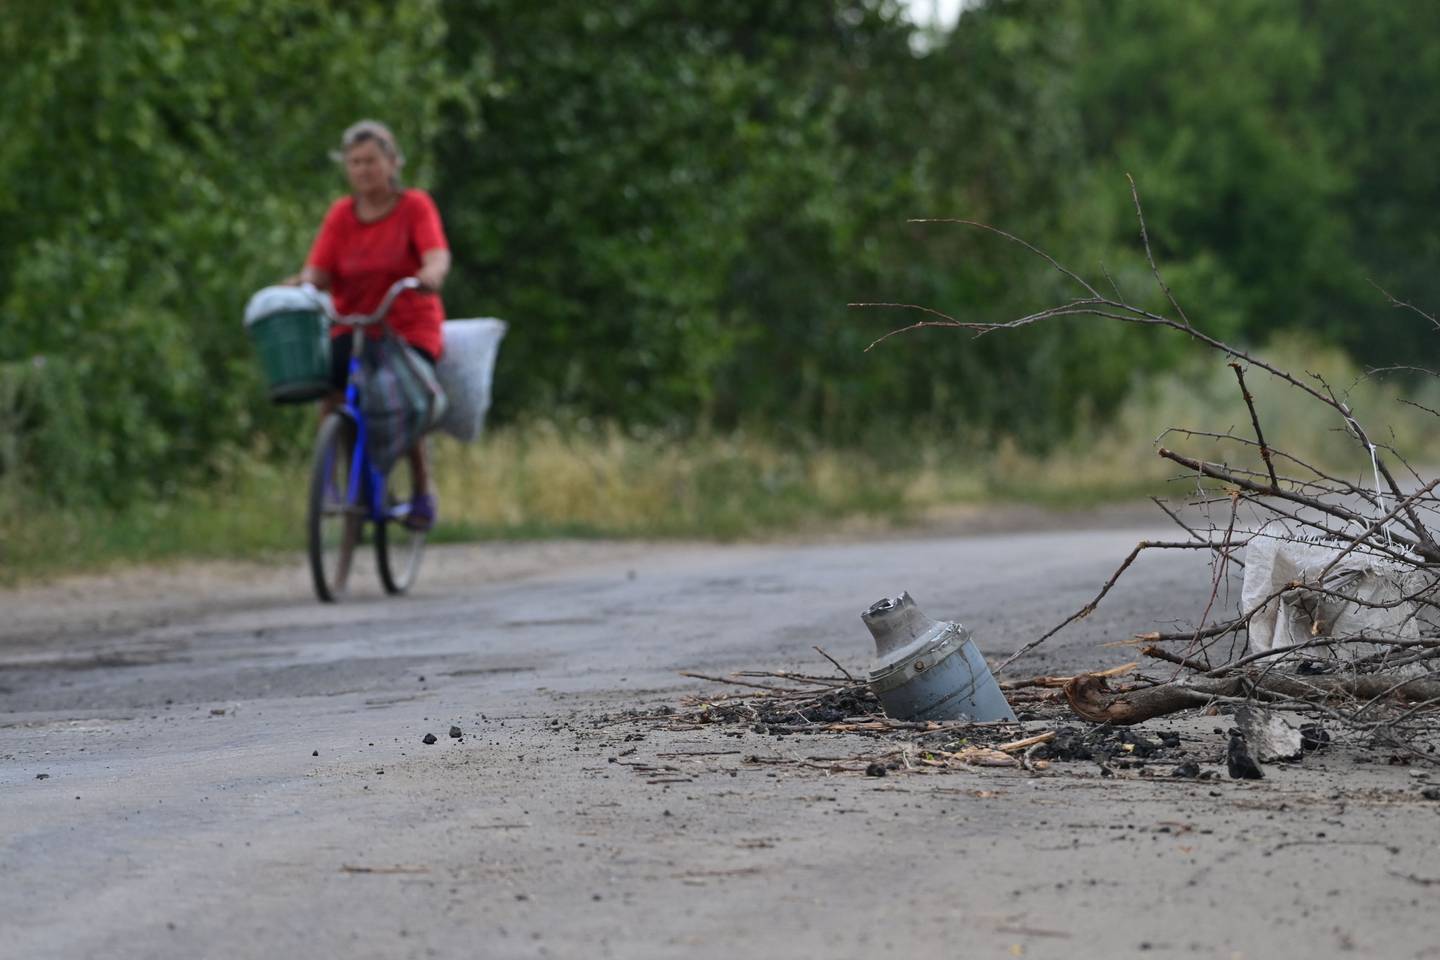 A spent Russian rocket half buried in the street near Siversk, in Donetsk. AFP